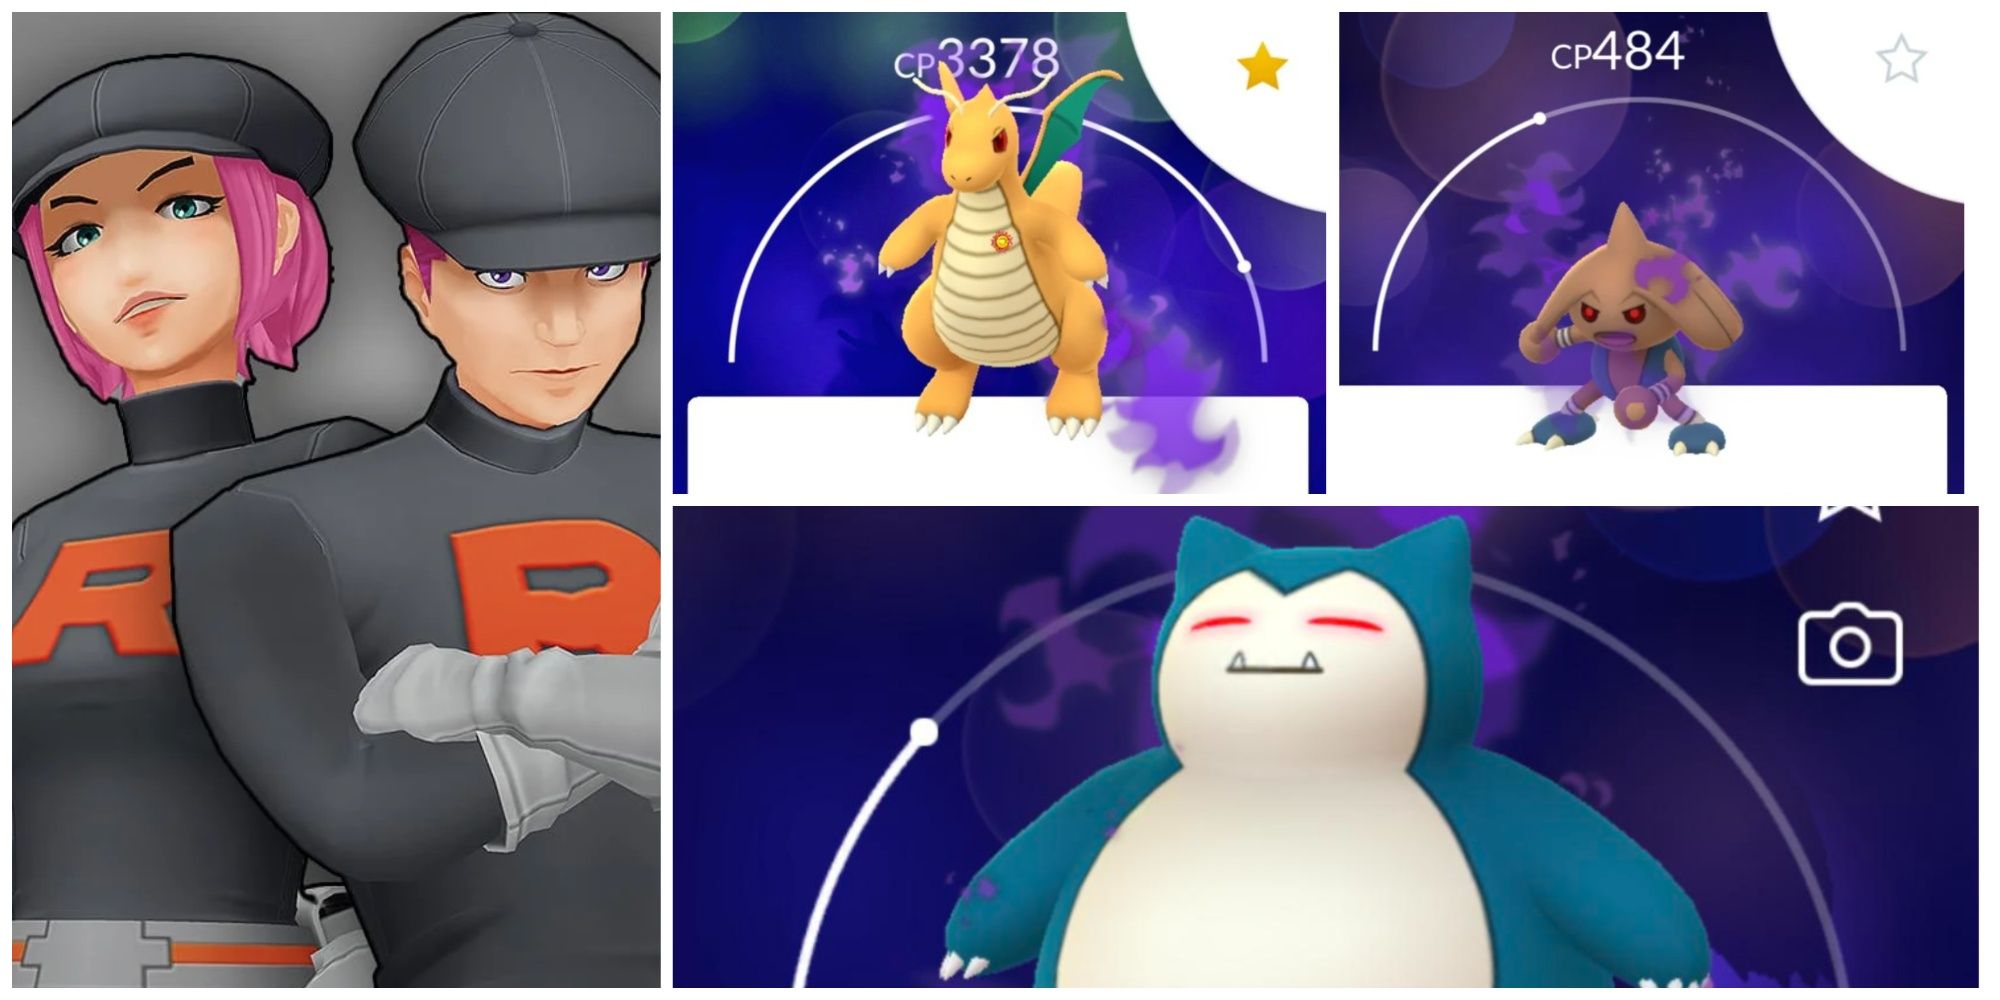 Two Team Rocket Grunts stand menacingly with Shadow versions of Dragonite, Hitmontop, and Snorlax